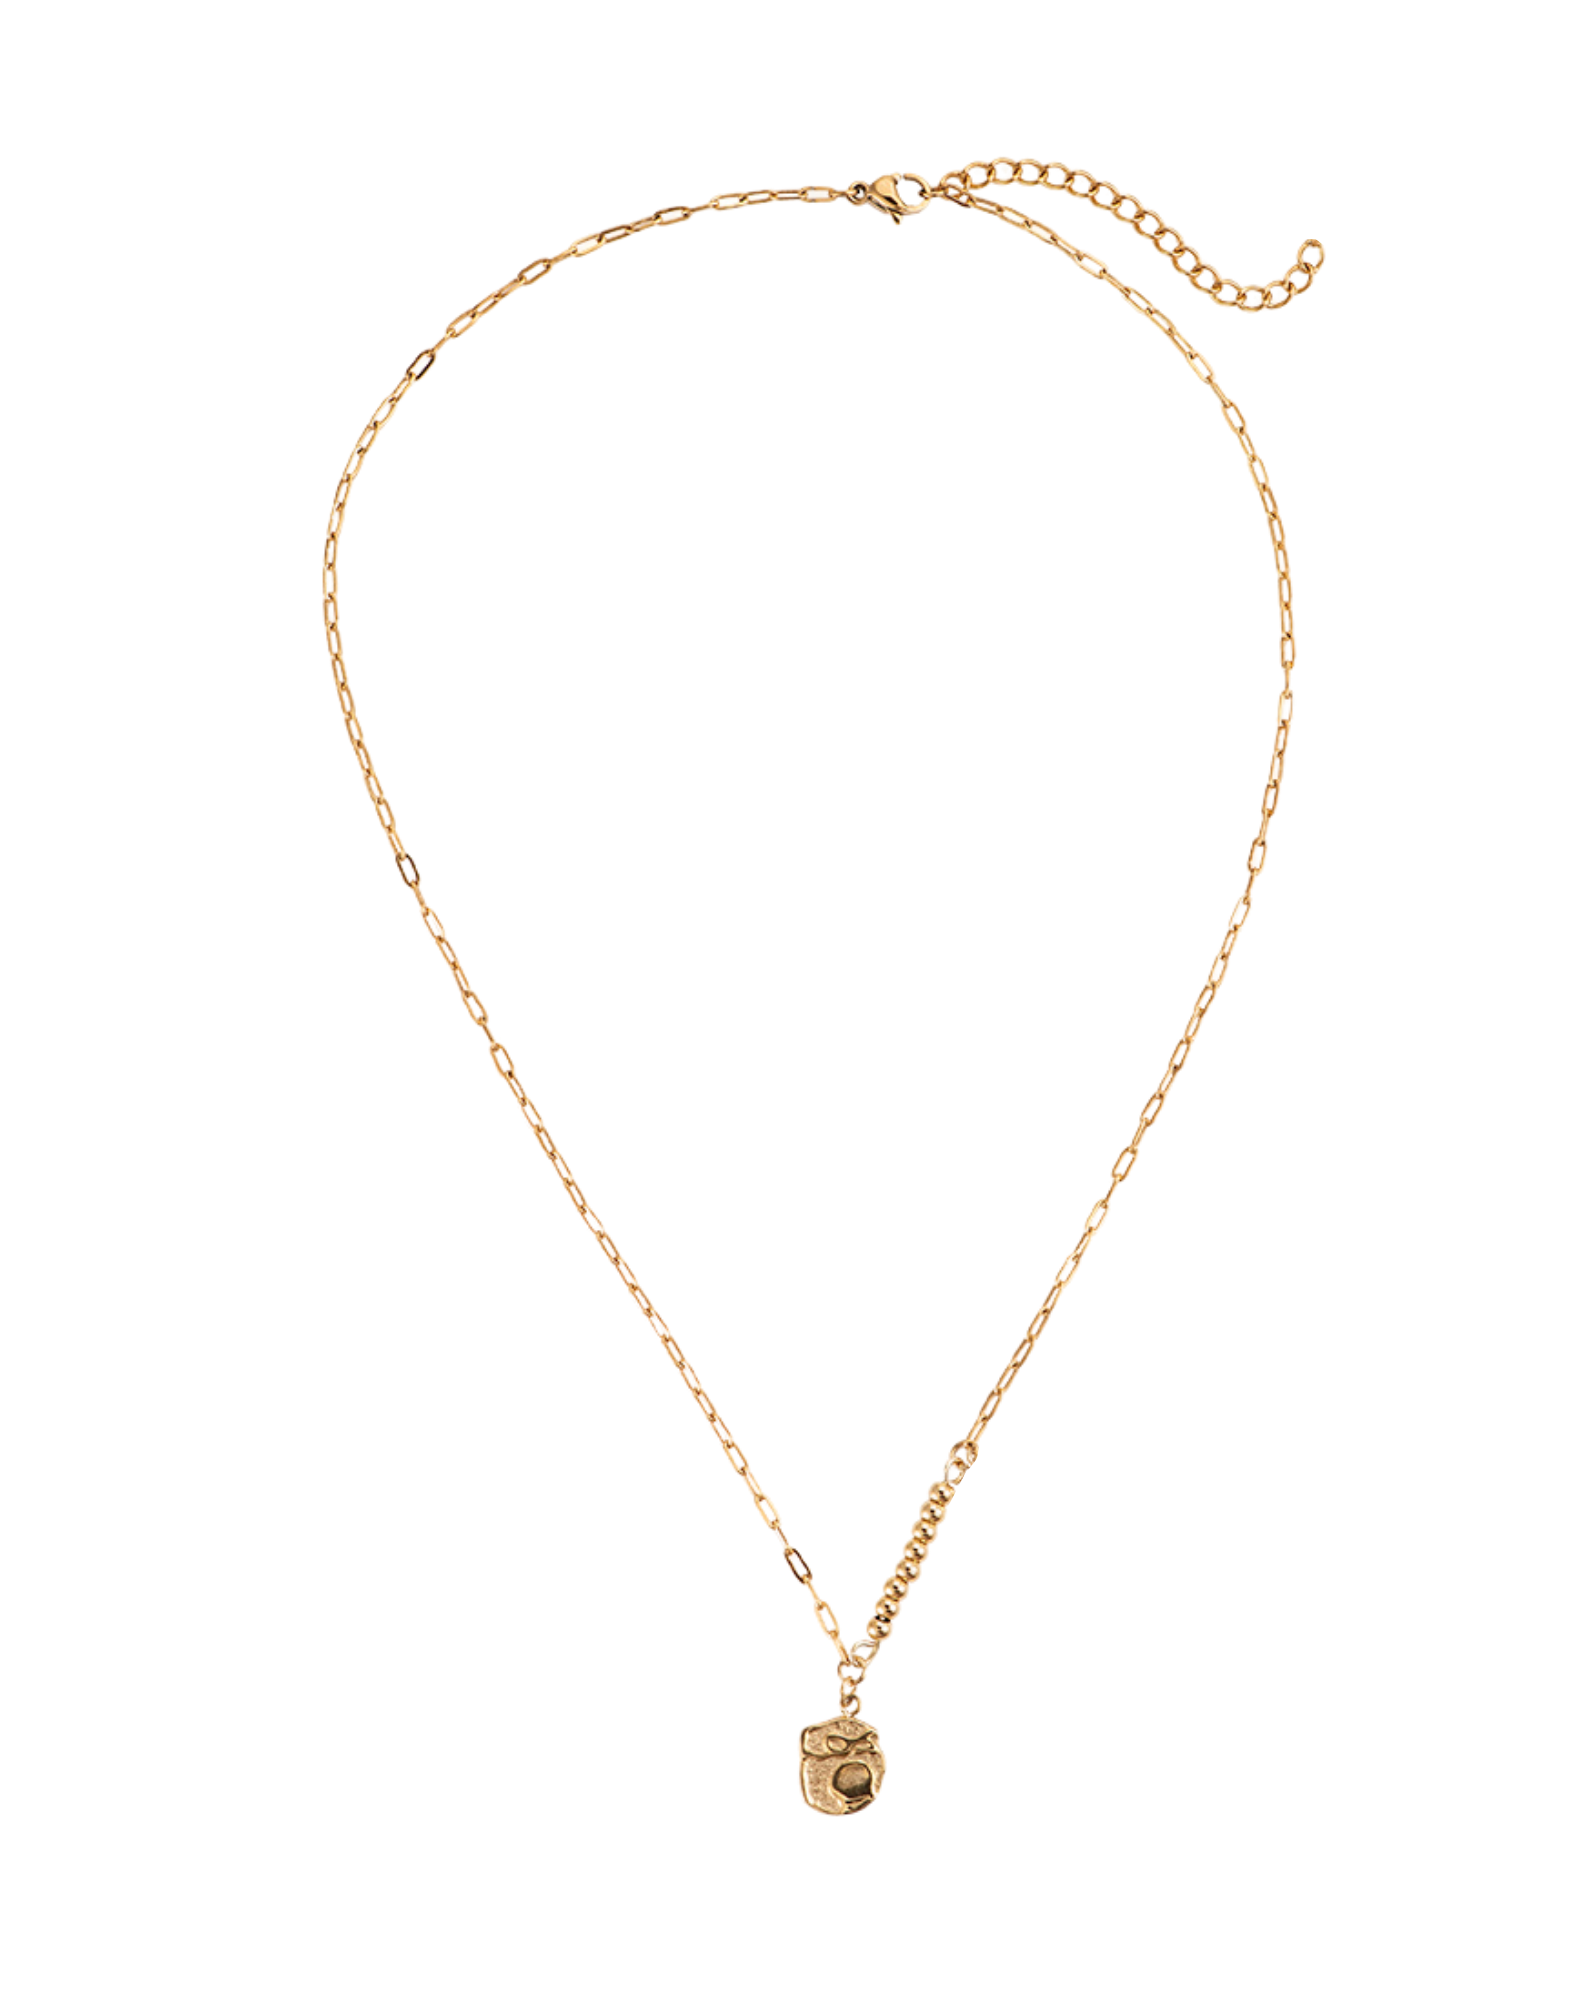 Dainty 14K Gold Plated Hammered Drop Pendant Necklace